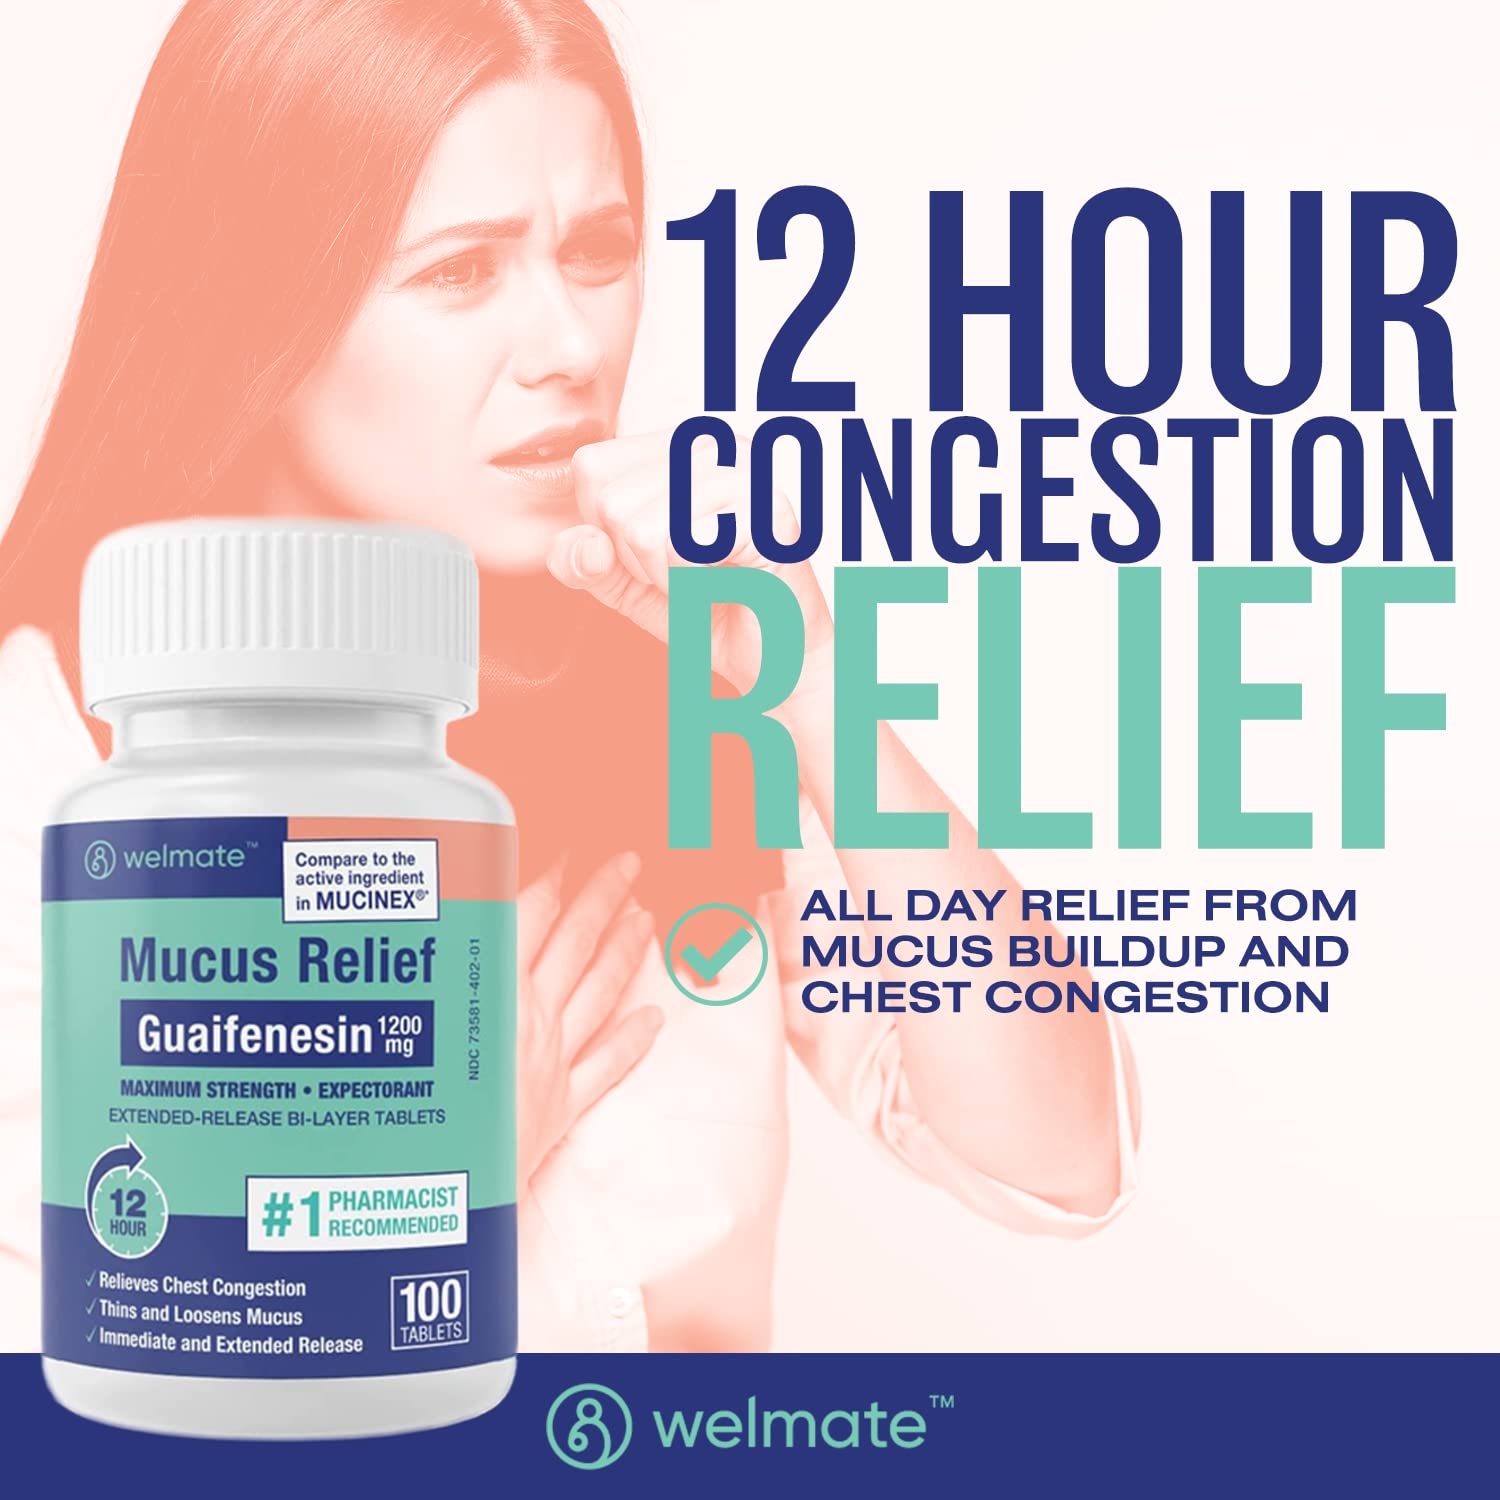 WELMATE | Mucus Relief | Guaifenesin 1200mg | Maximum Strength | 12 Hr Support | Relief from Cough, Nasal & Chest Congestion, Cold, & Allergies | Expectorant | Extended Release Tablets | 100 Ct